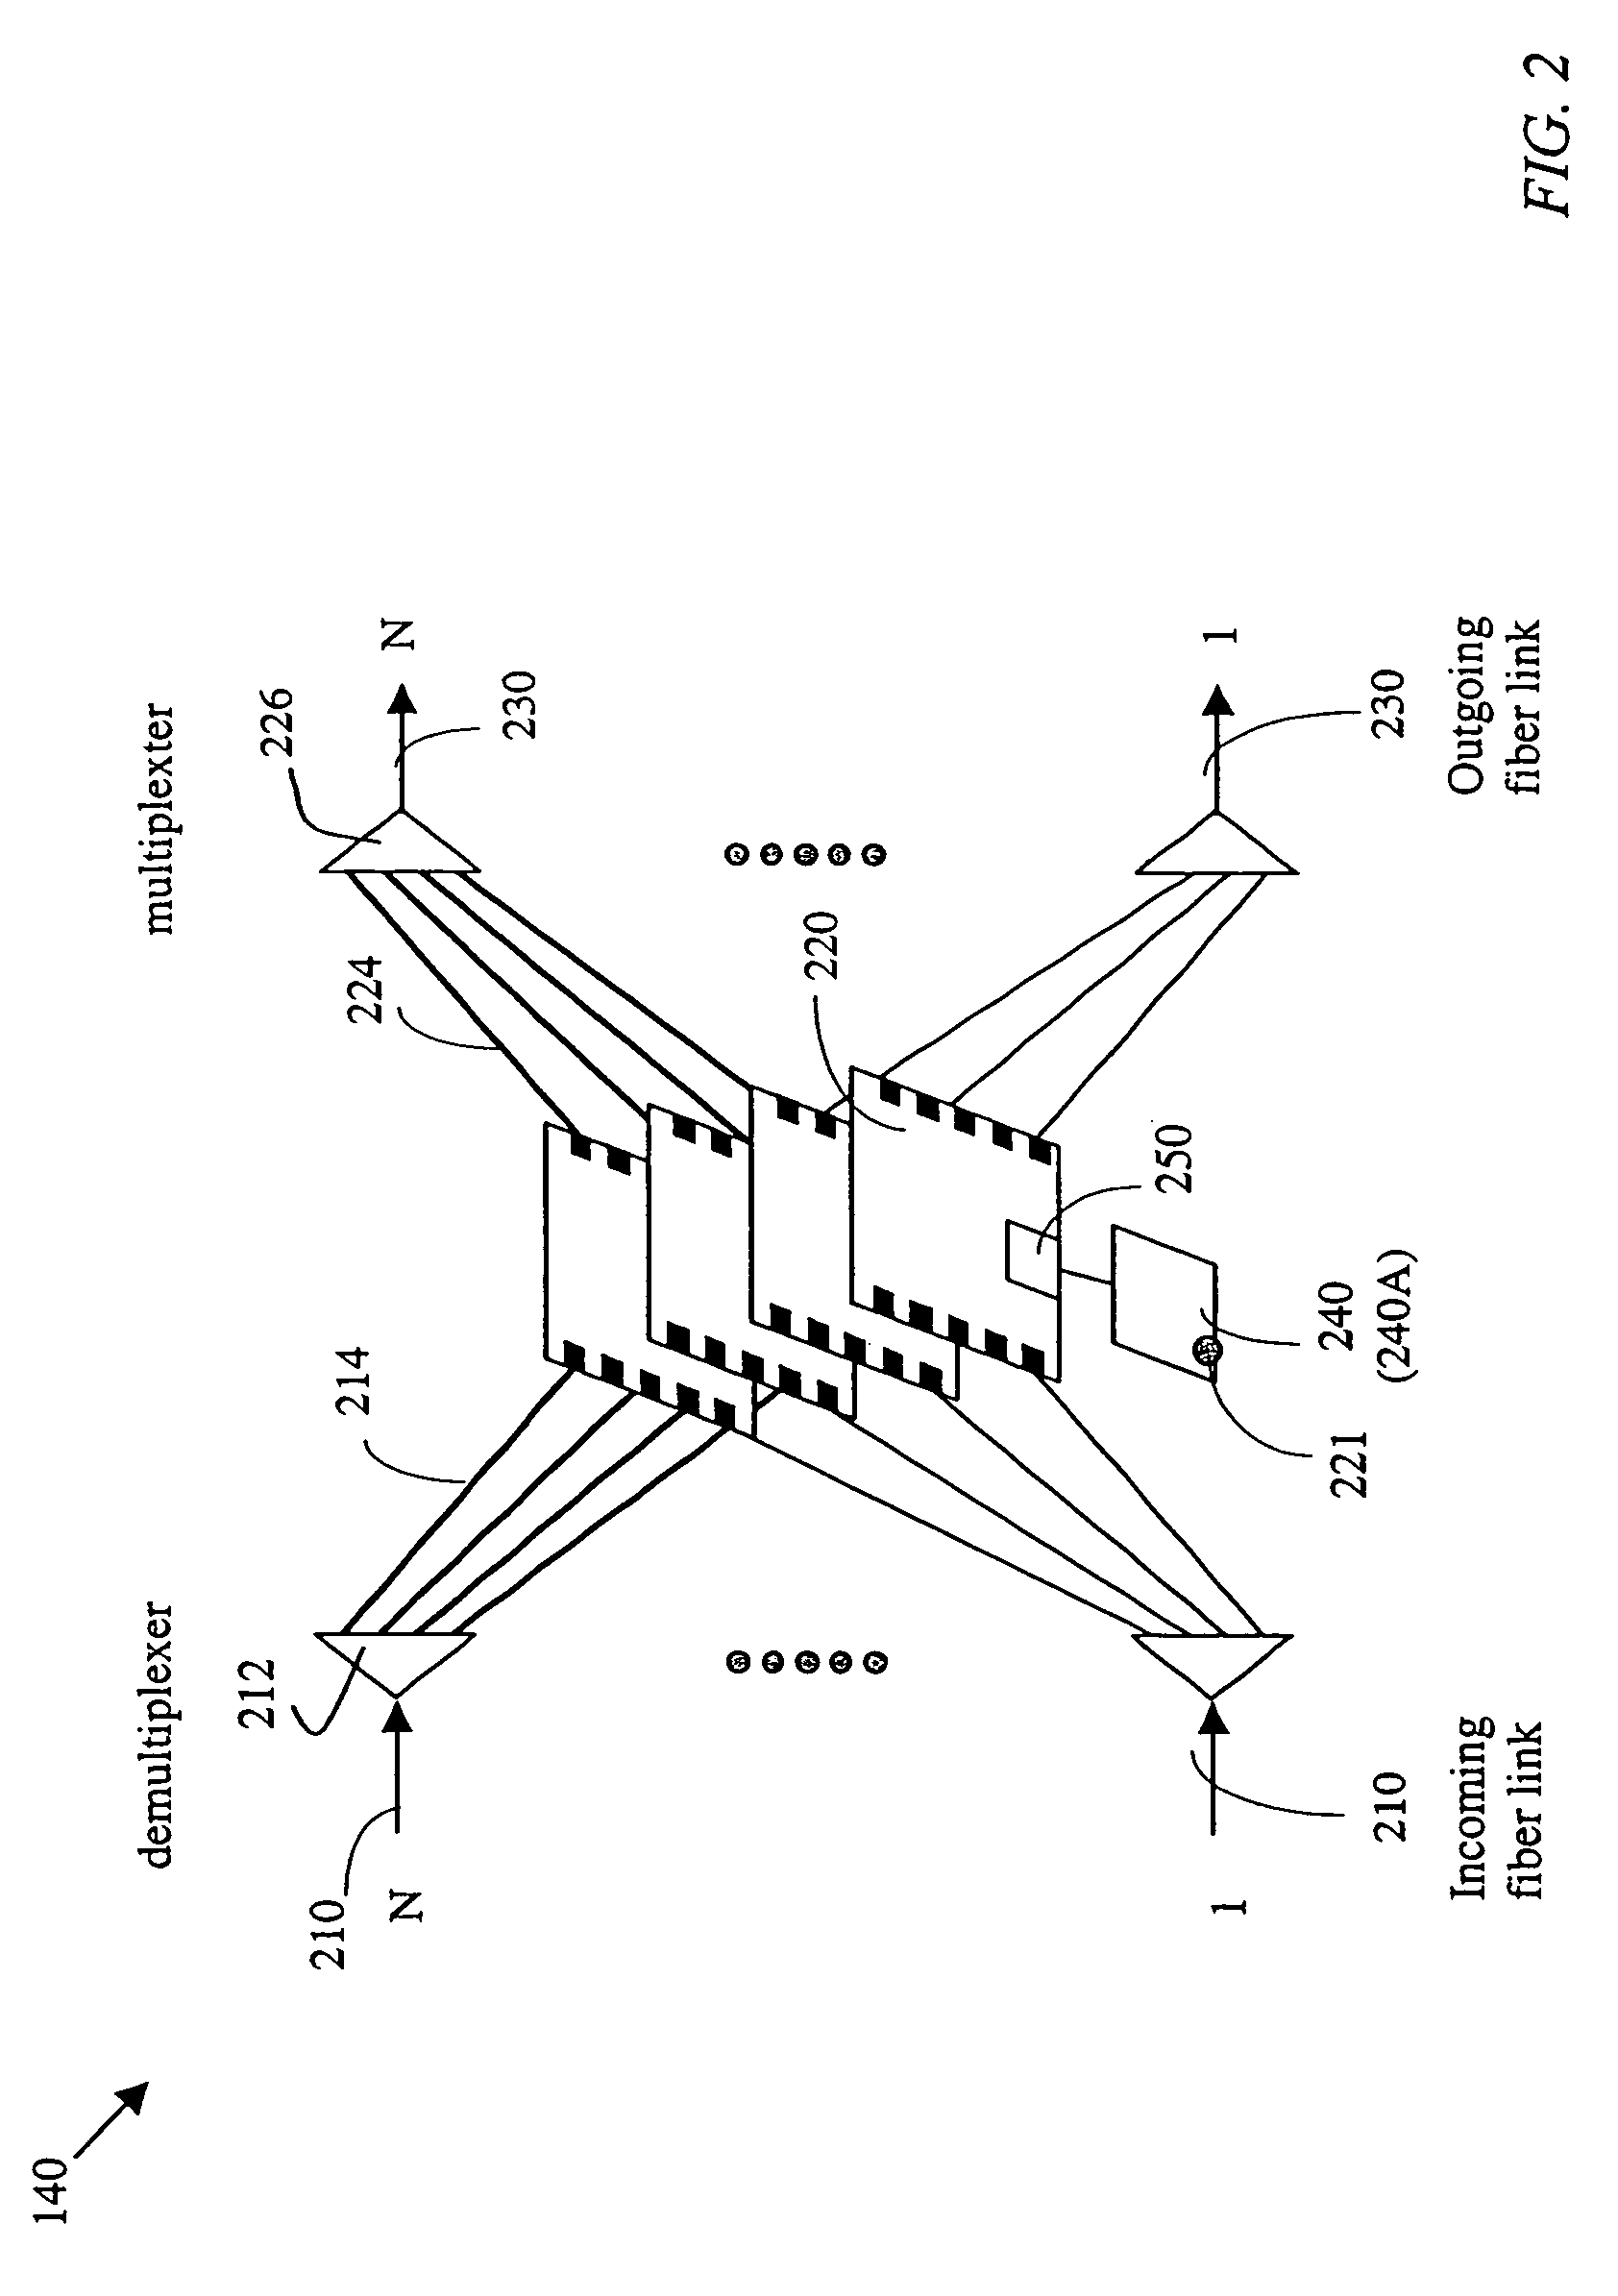 Rate-controlled optical burst switching